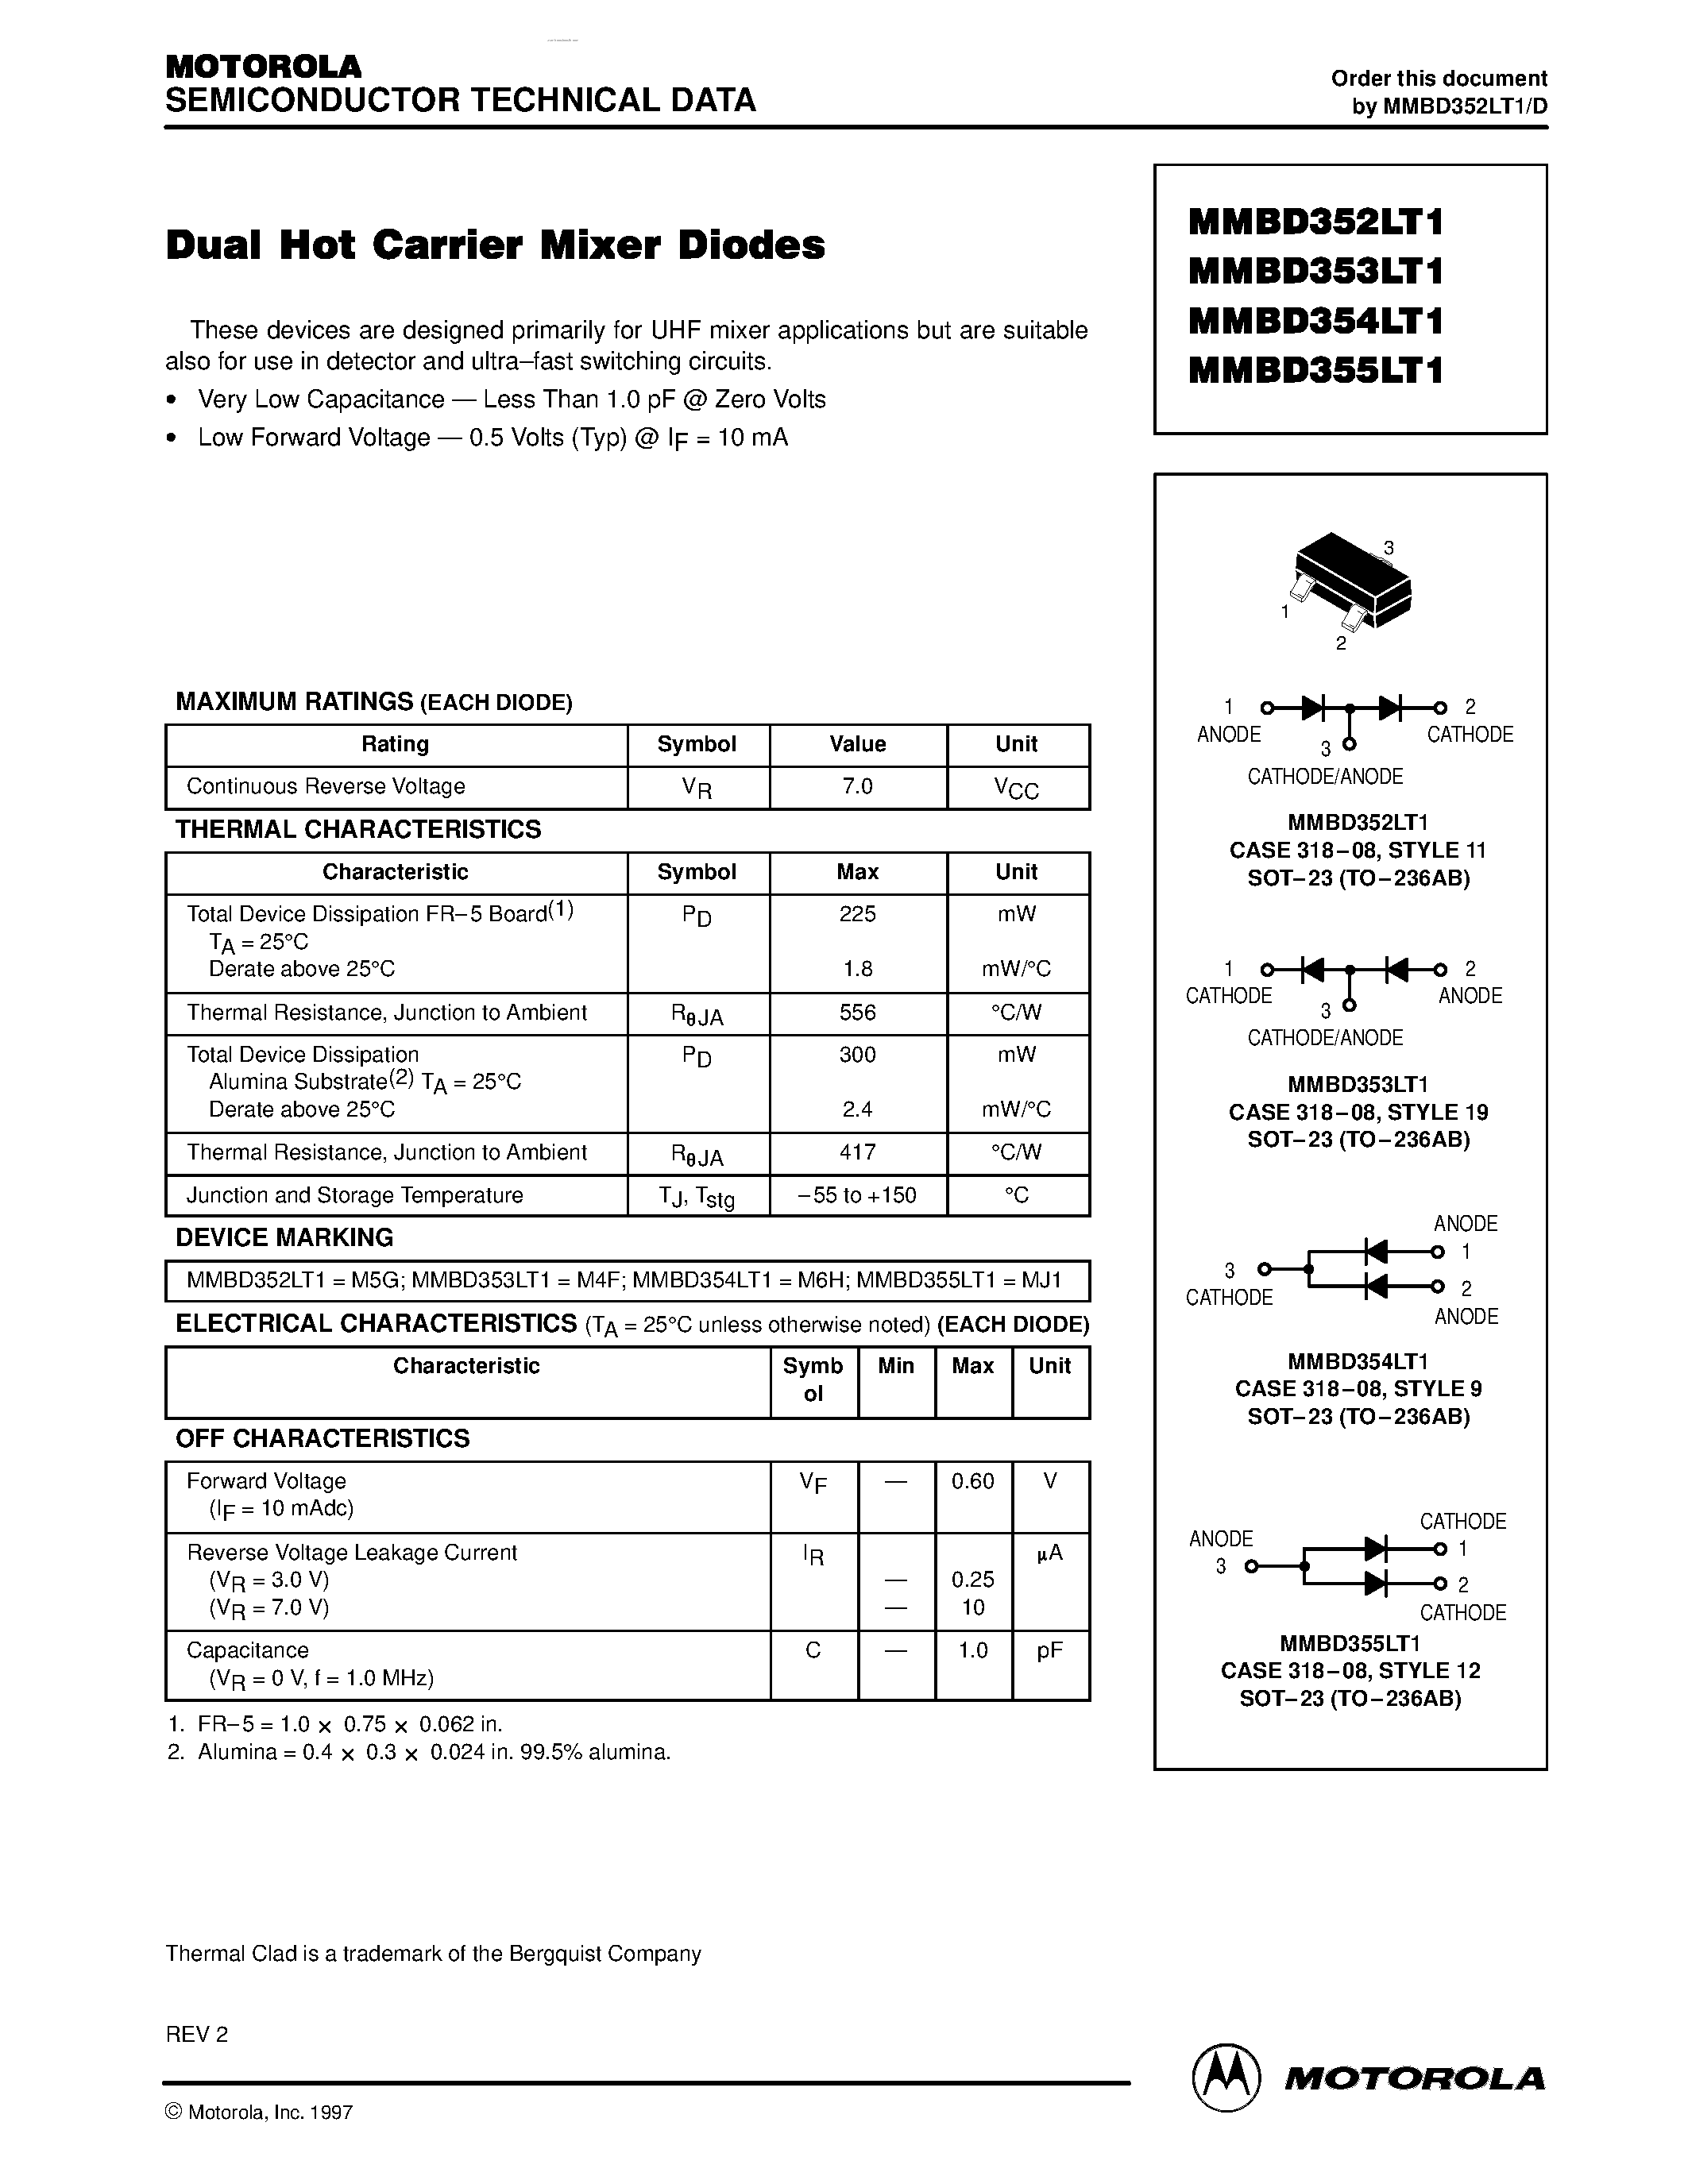 Datasheet MMBD352LT1 - (MMBD35xLT1) Dual Hot Carrier Mixer Diodes page 1